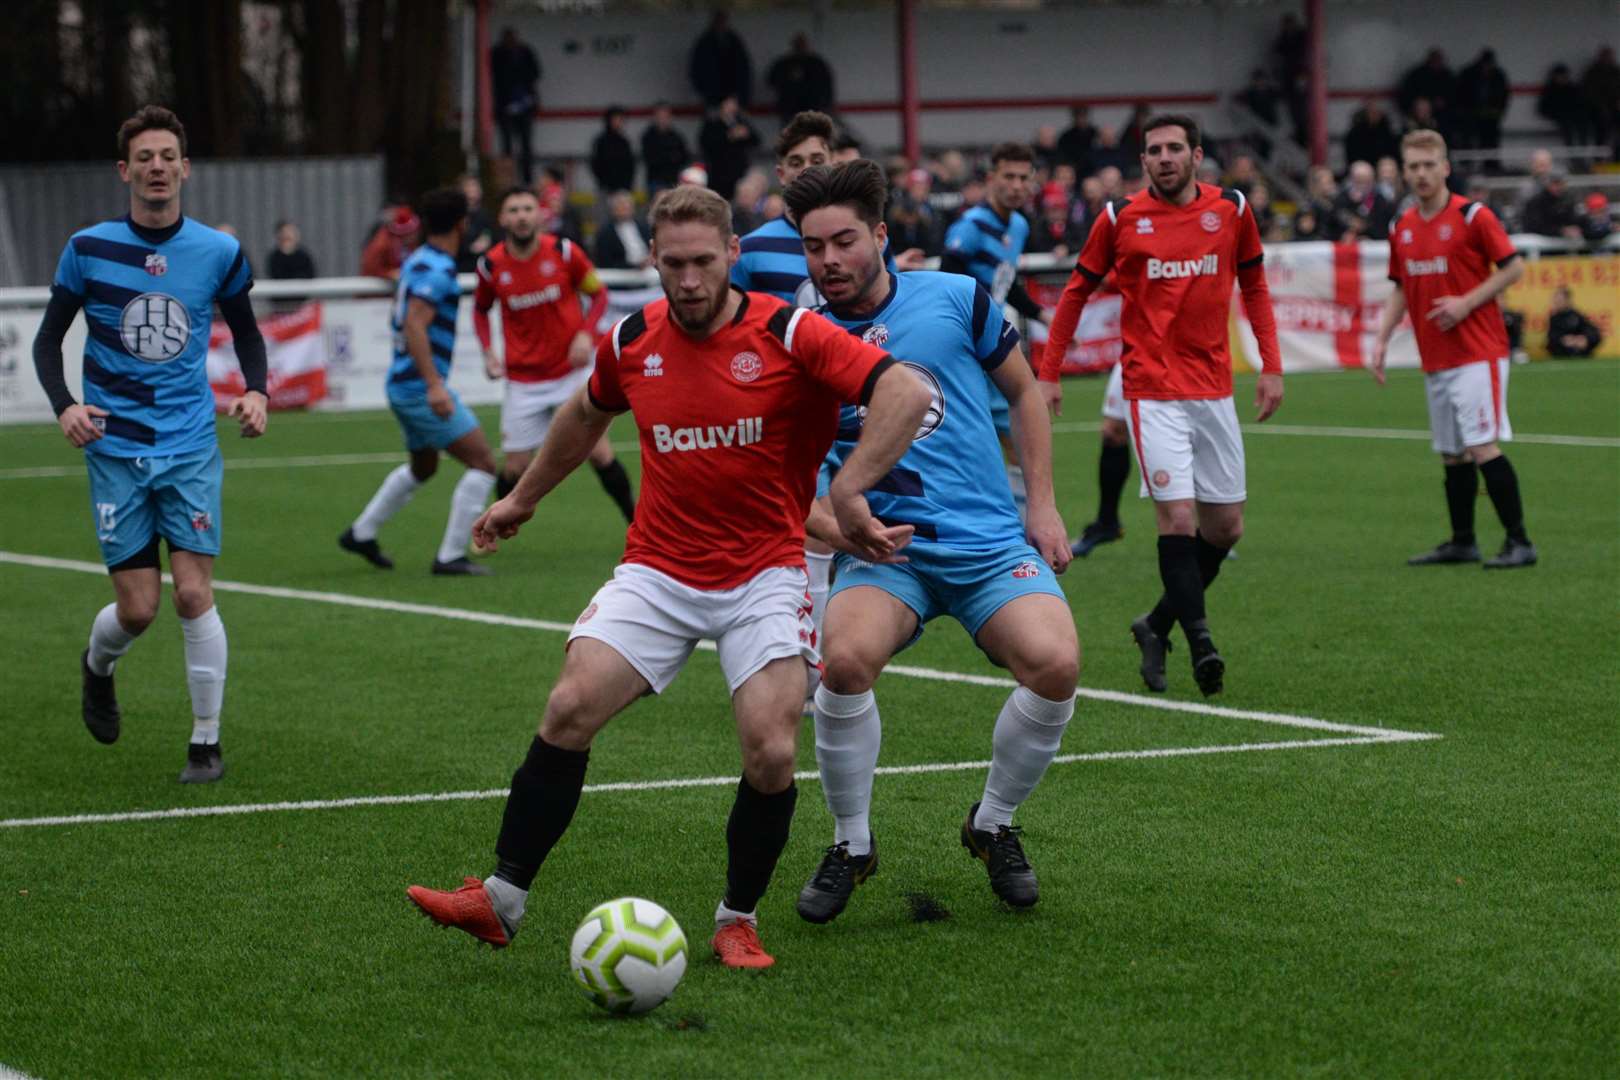 Sheppey United will be playing at Chatham's Bauvill Stadium in a post-lockdown tournament this week Picture: Chris Davey